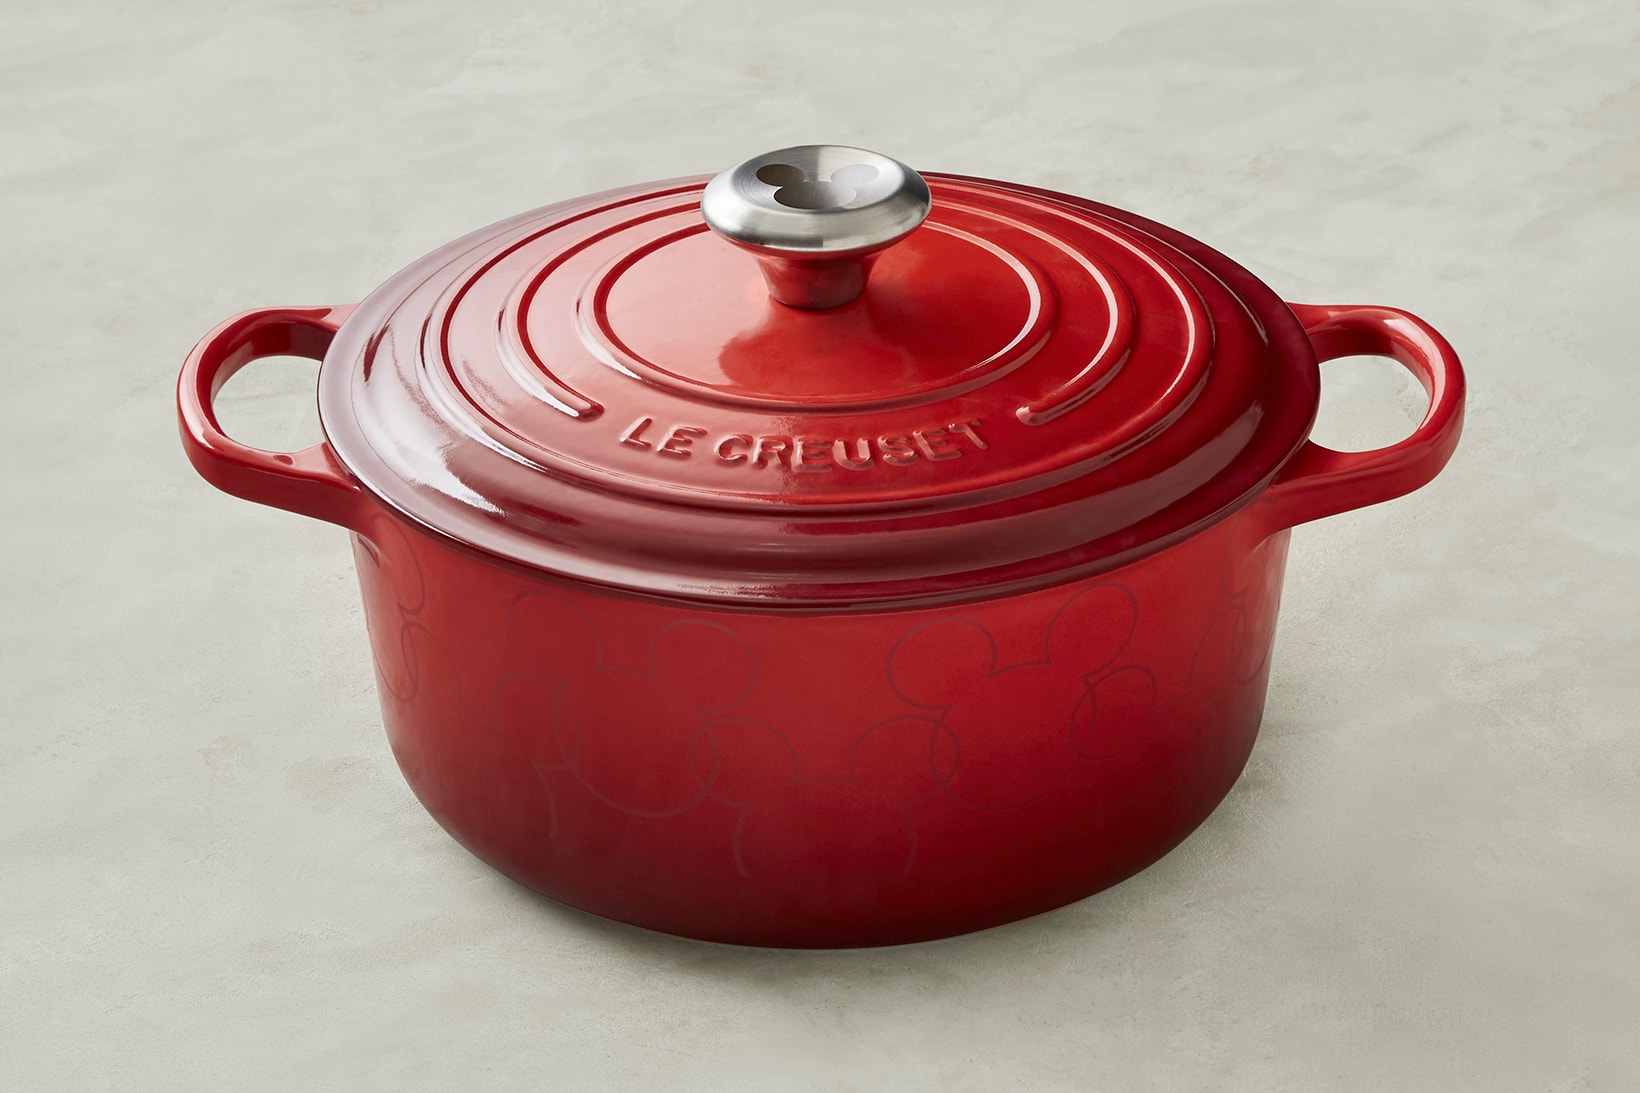 https://image-cdn.hypb.st/https%3A%2F%2Fhypebeast.com%2Fwp-content%2Fblogs.dir%2F6%2Ffiles%2F2020%2F10%2Fmickey-mouse-le-creuset-collaboration-cookware-collection-02.jpg?cbr=1&q=90